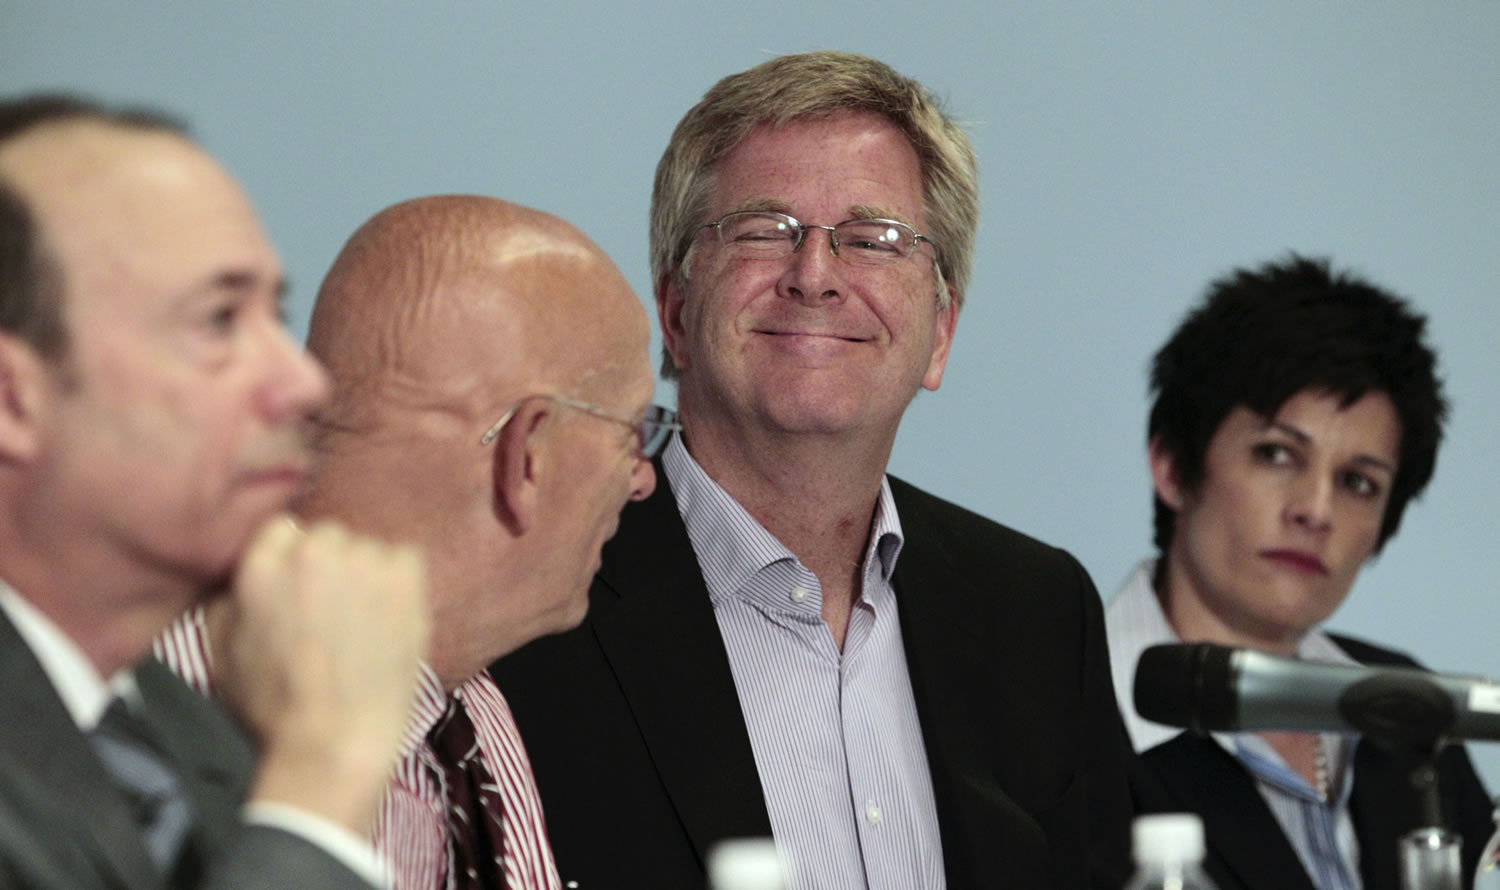 Travel guide Rick Steves, second from right, smiles as he sits with Mark Johnson, from left, Dr.